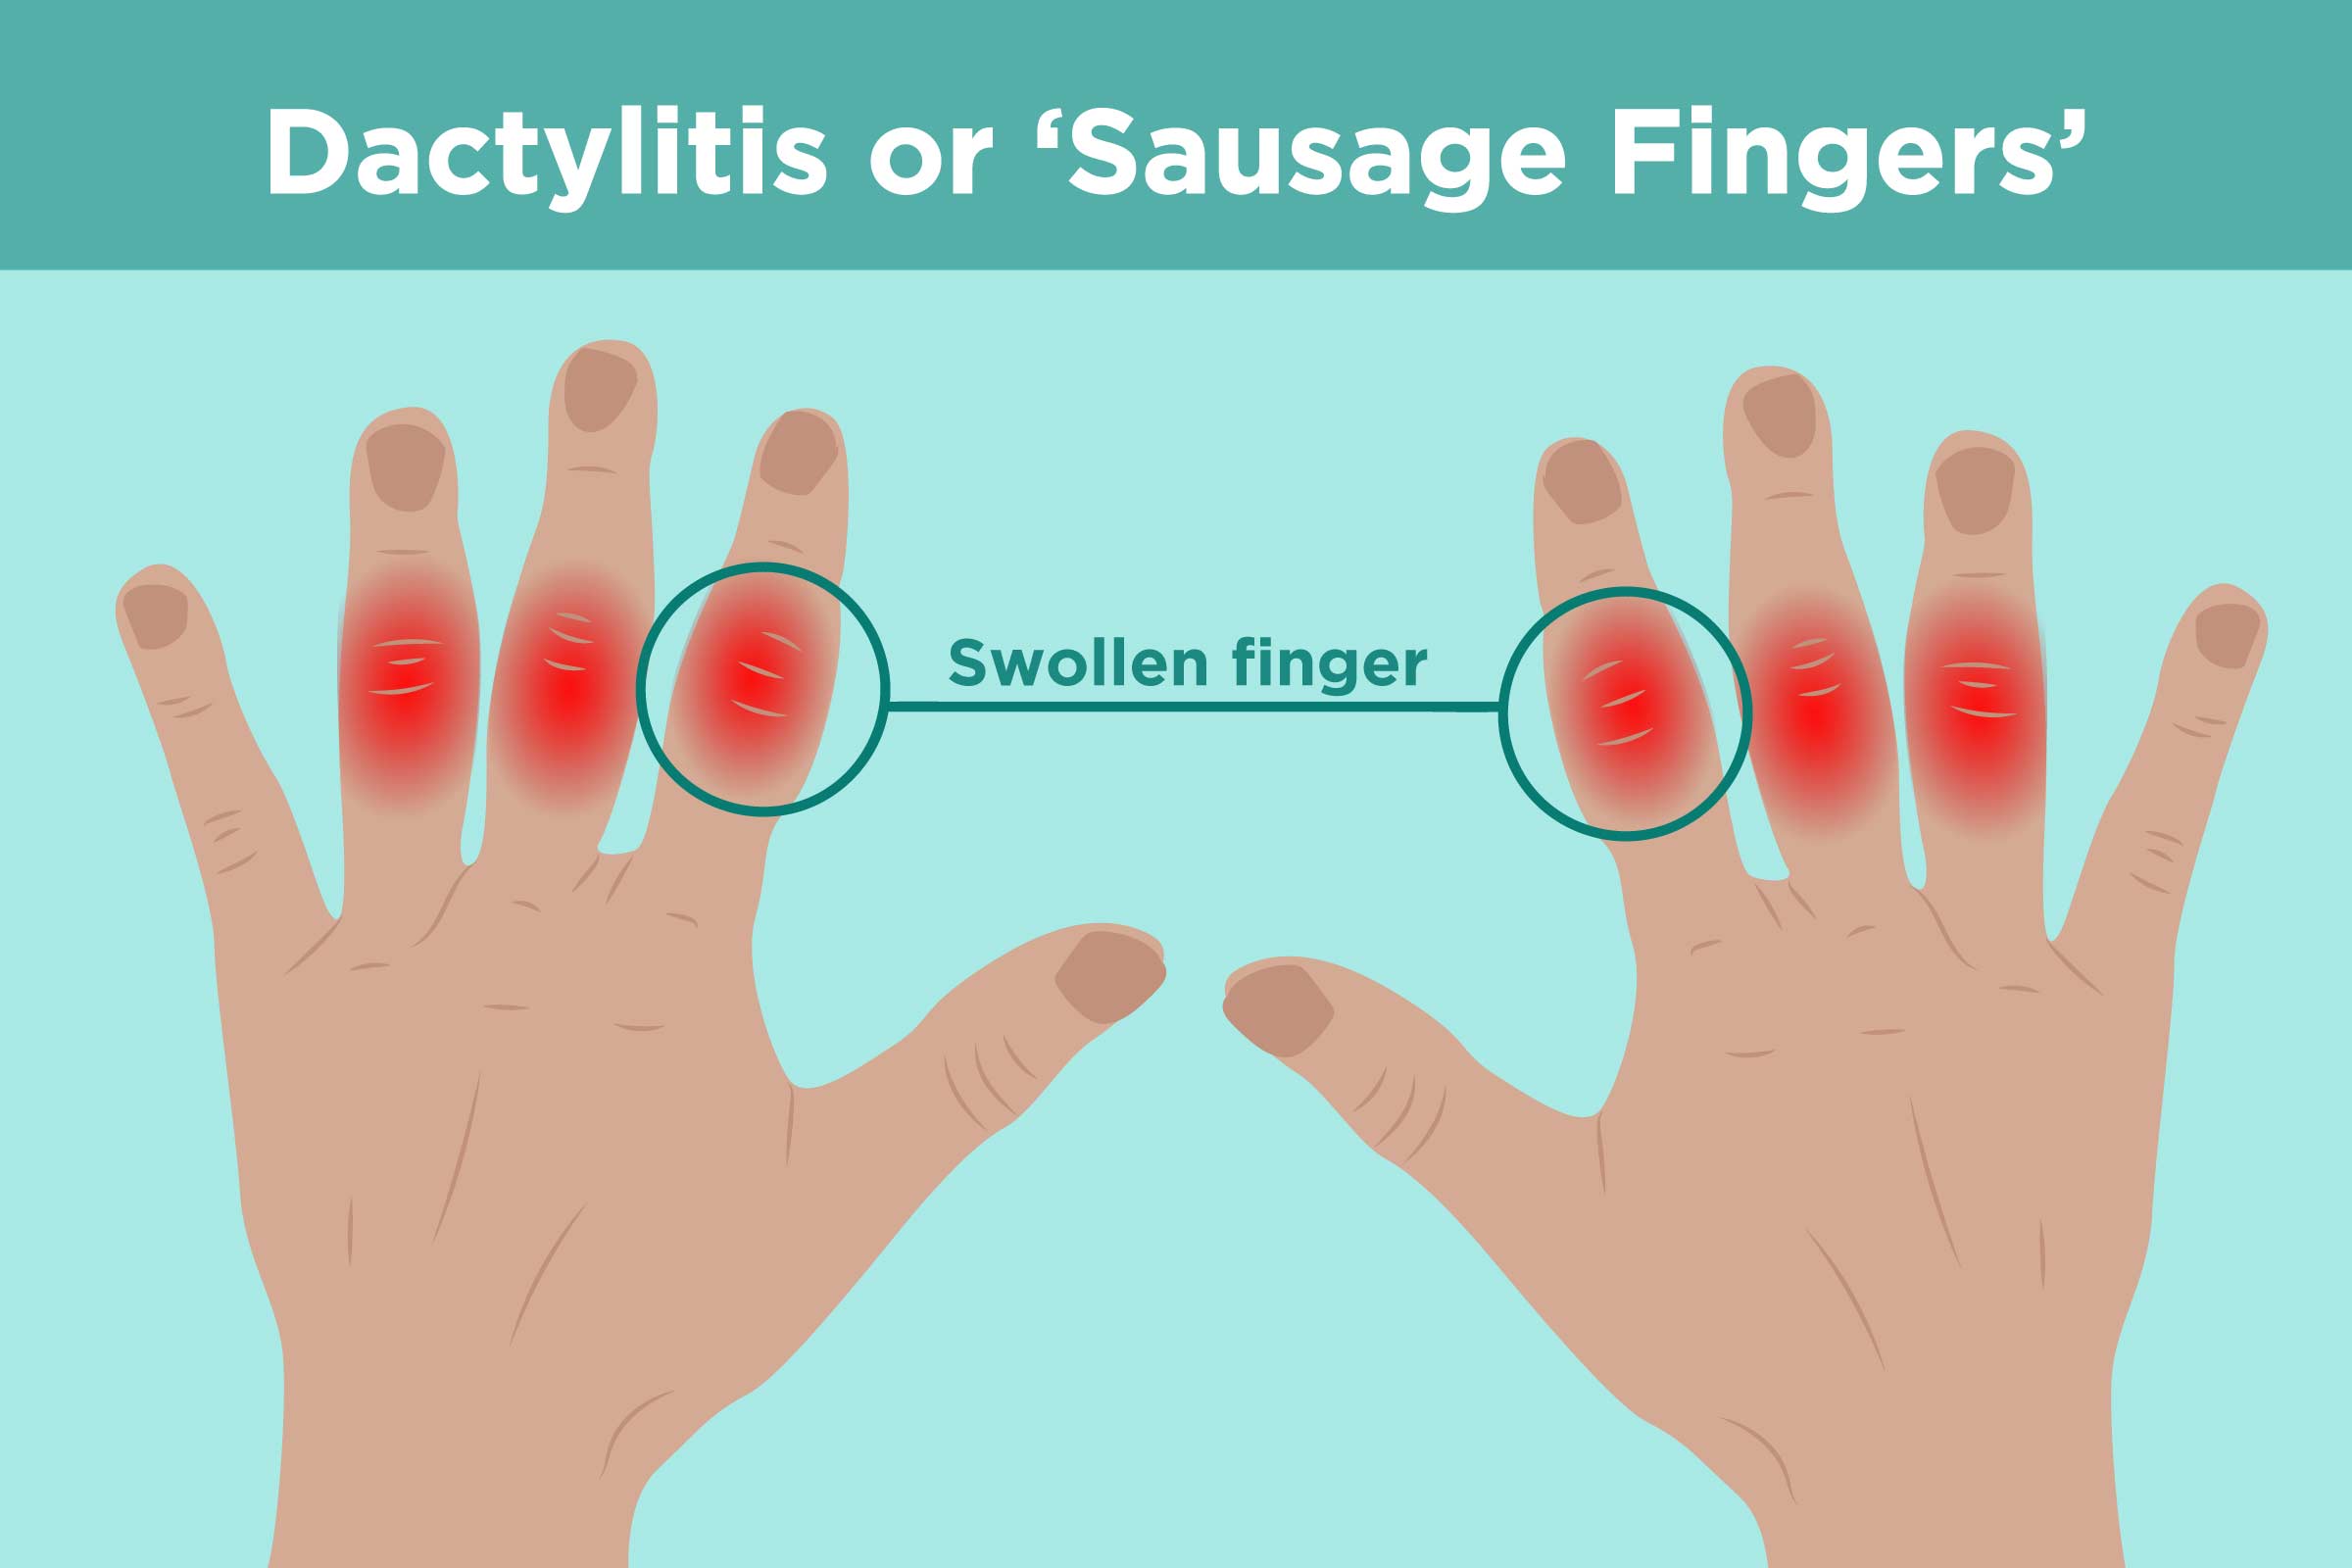 Learn more about dactylitis, or inflammation of the fingers and toes that i...